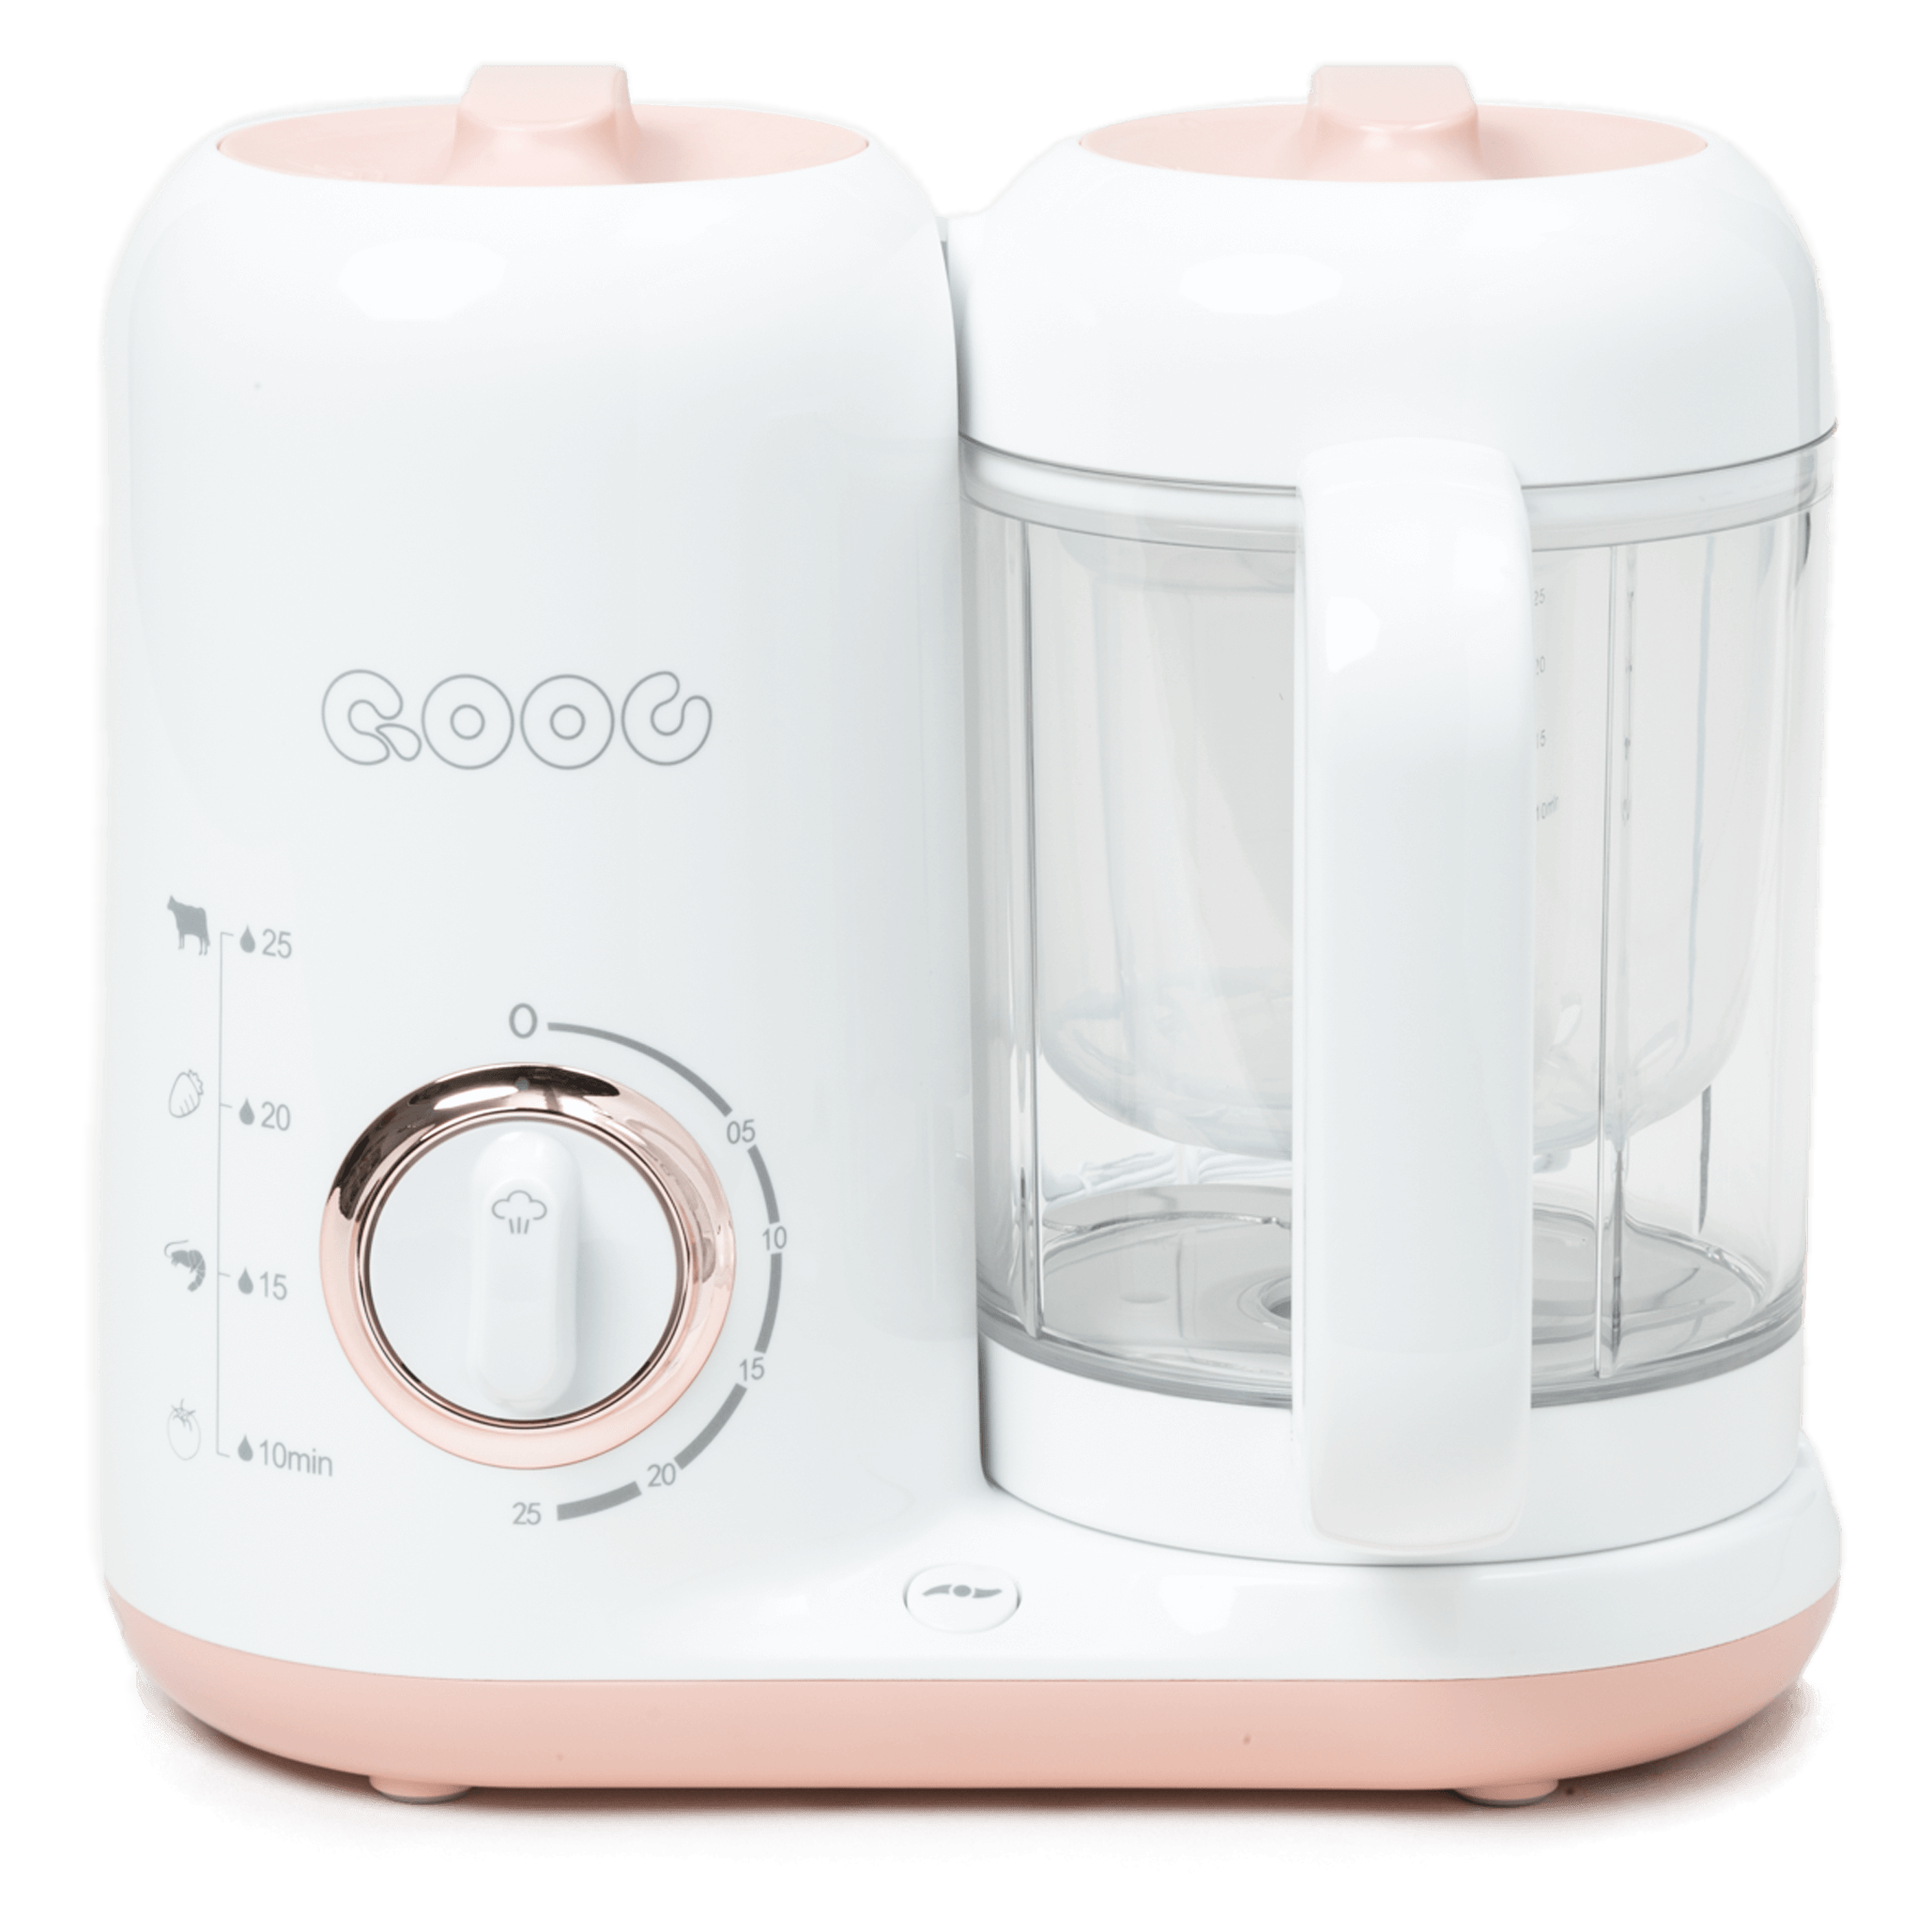 https://res.cloudinary.com/hksqkdlah/image/upload/43469-sil-qooc-4-in-1-baby-food-maker-pro.png